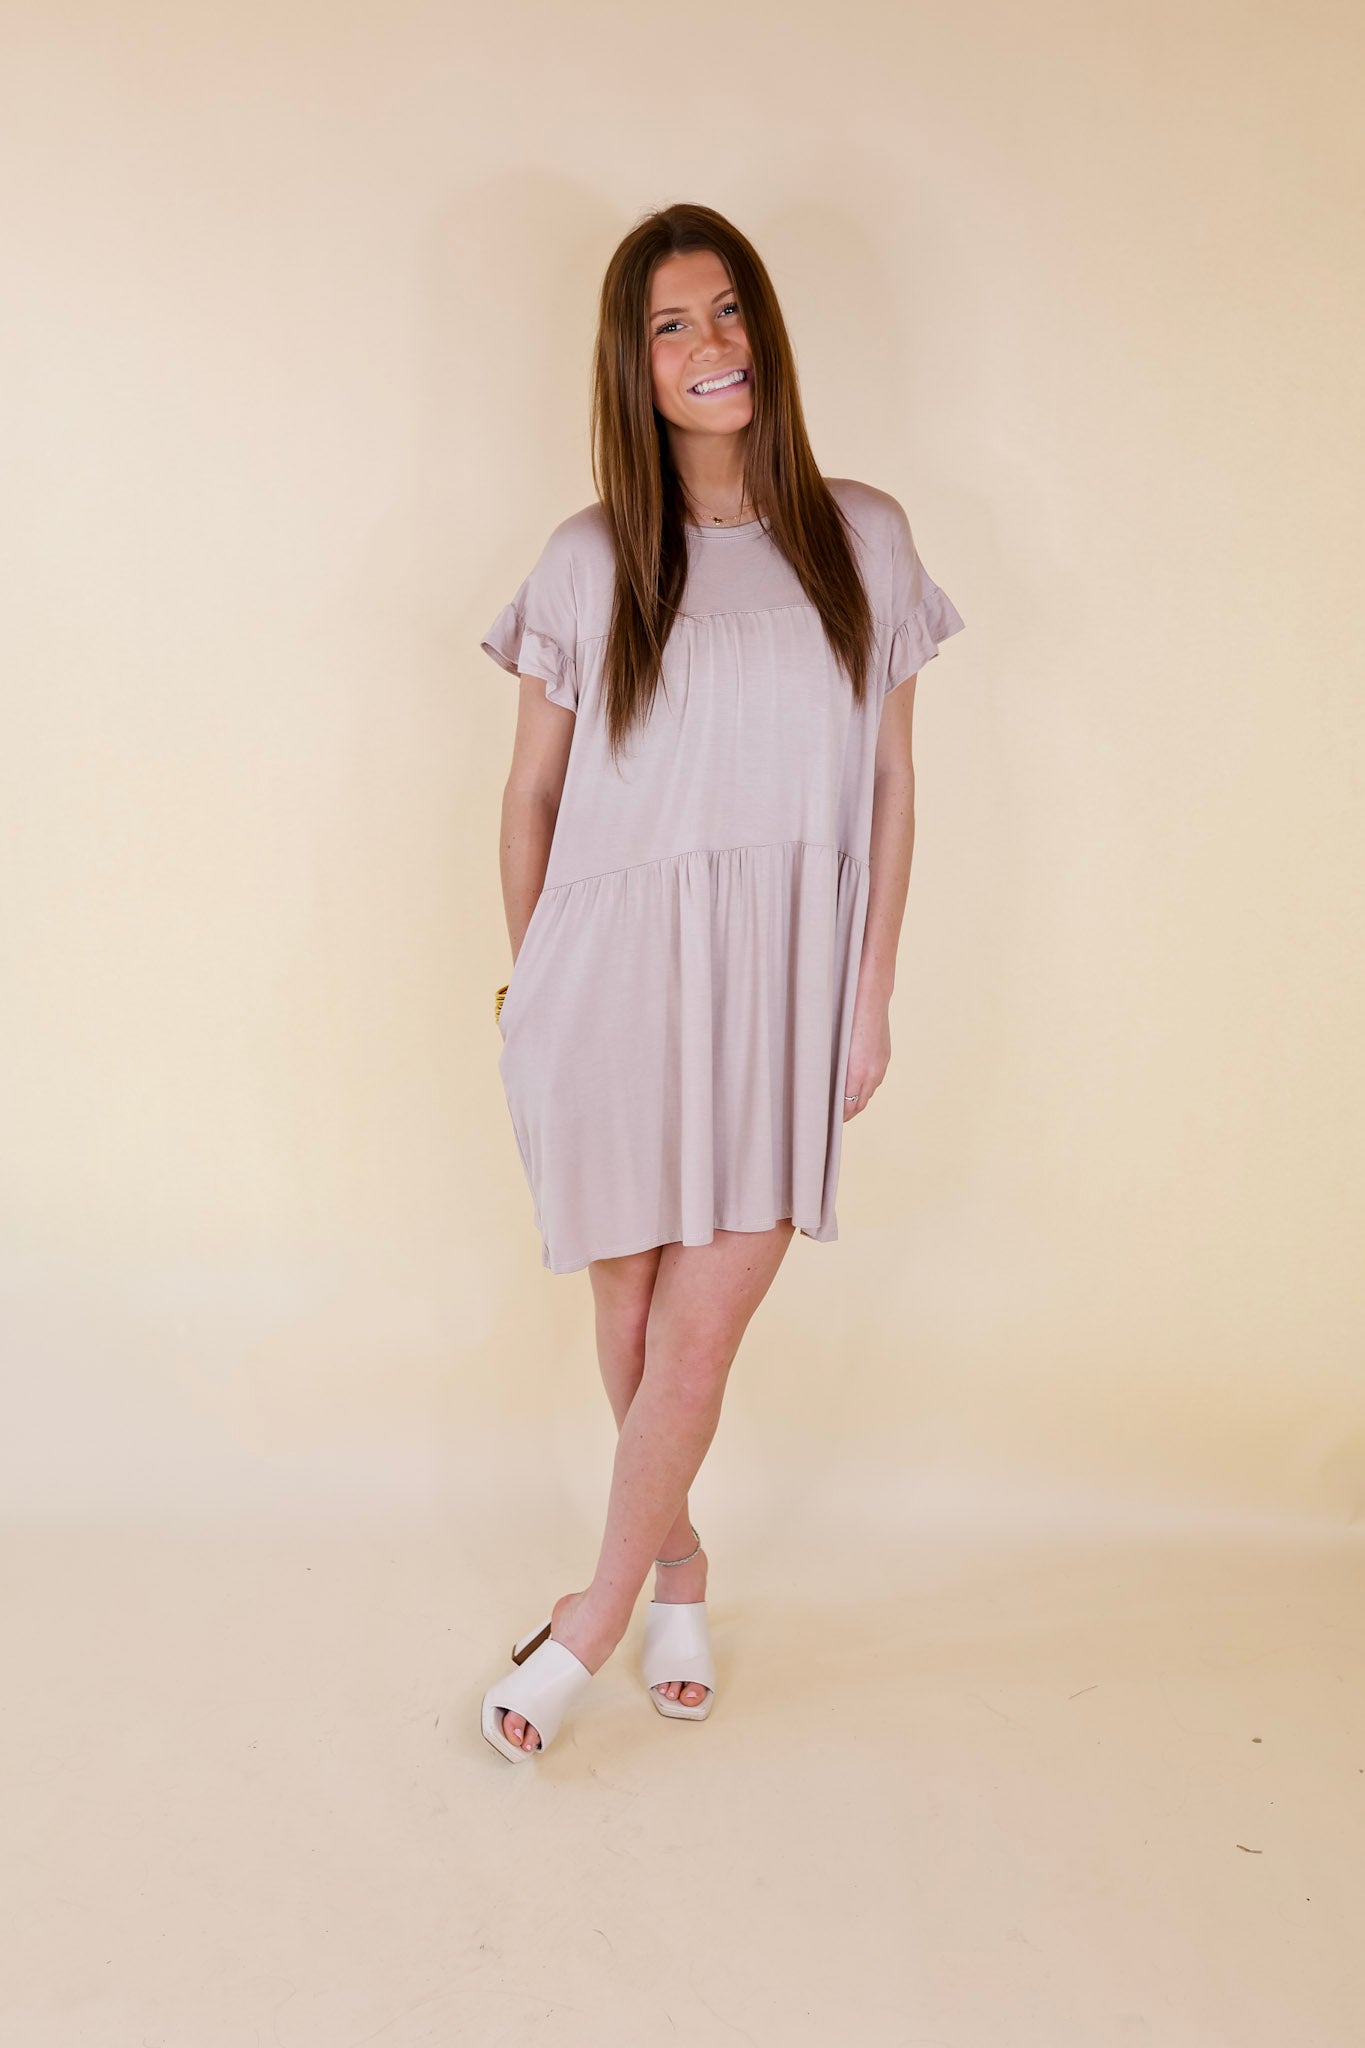 Gorgeous Girly Ruffle Sleeve Tiered Dress in Taupe - Giddy Up Glamour Boutique